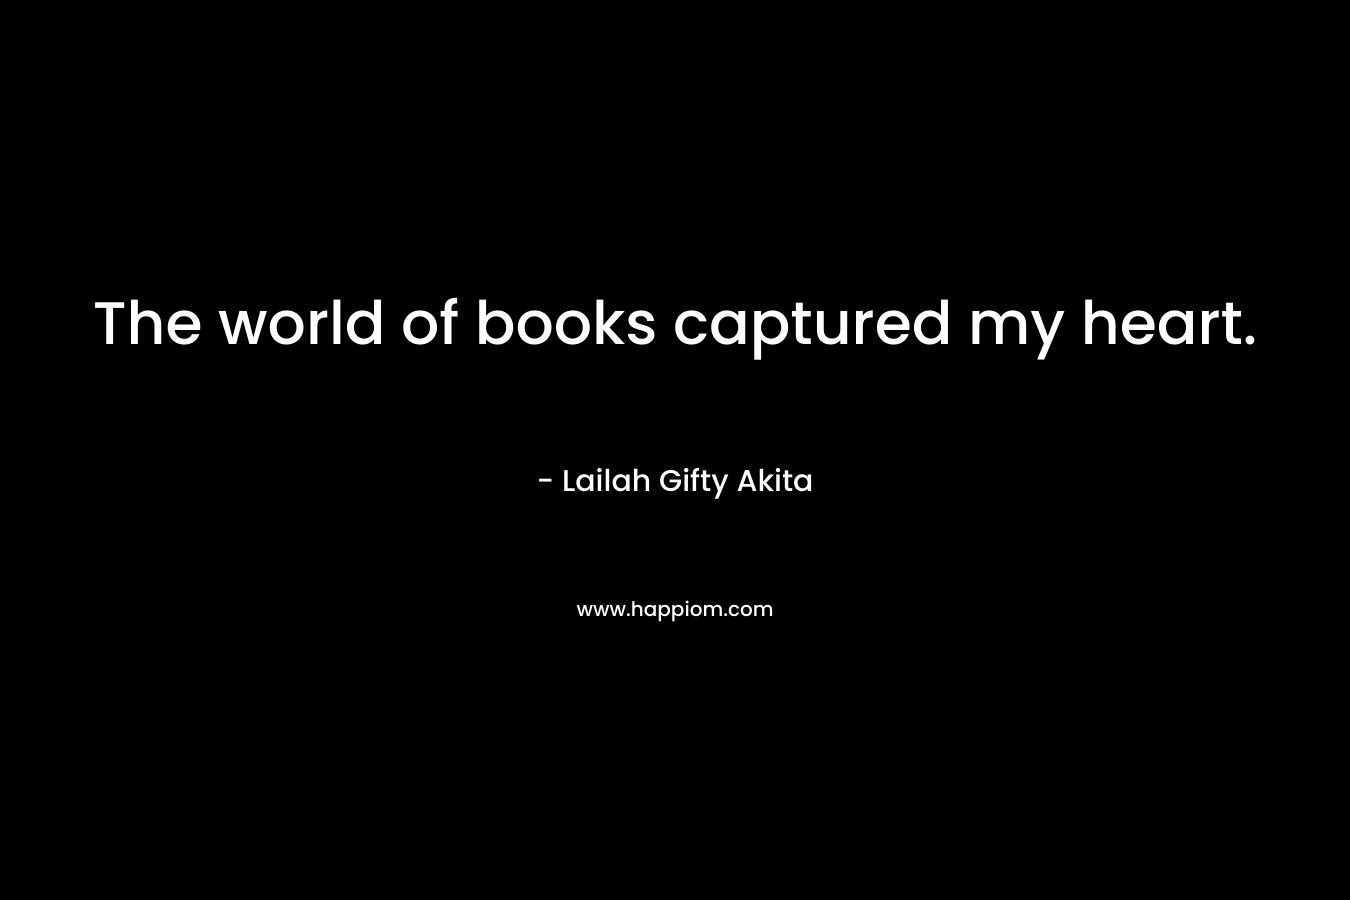 The world of books captured my heart. – Lailah Gifty Akita